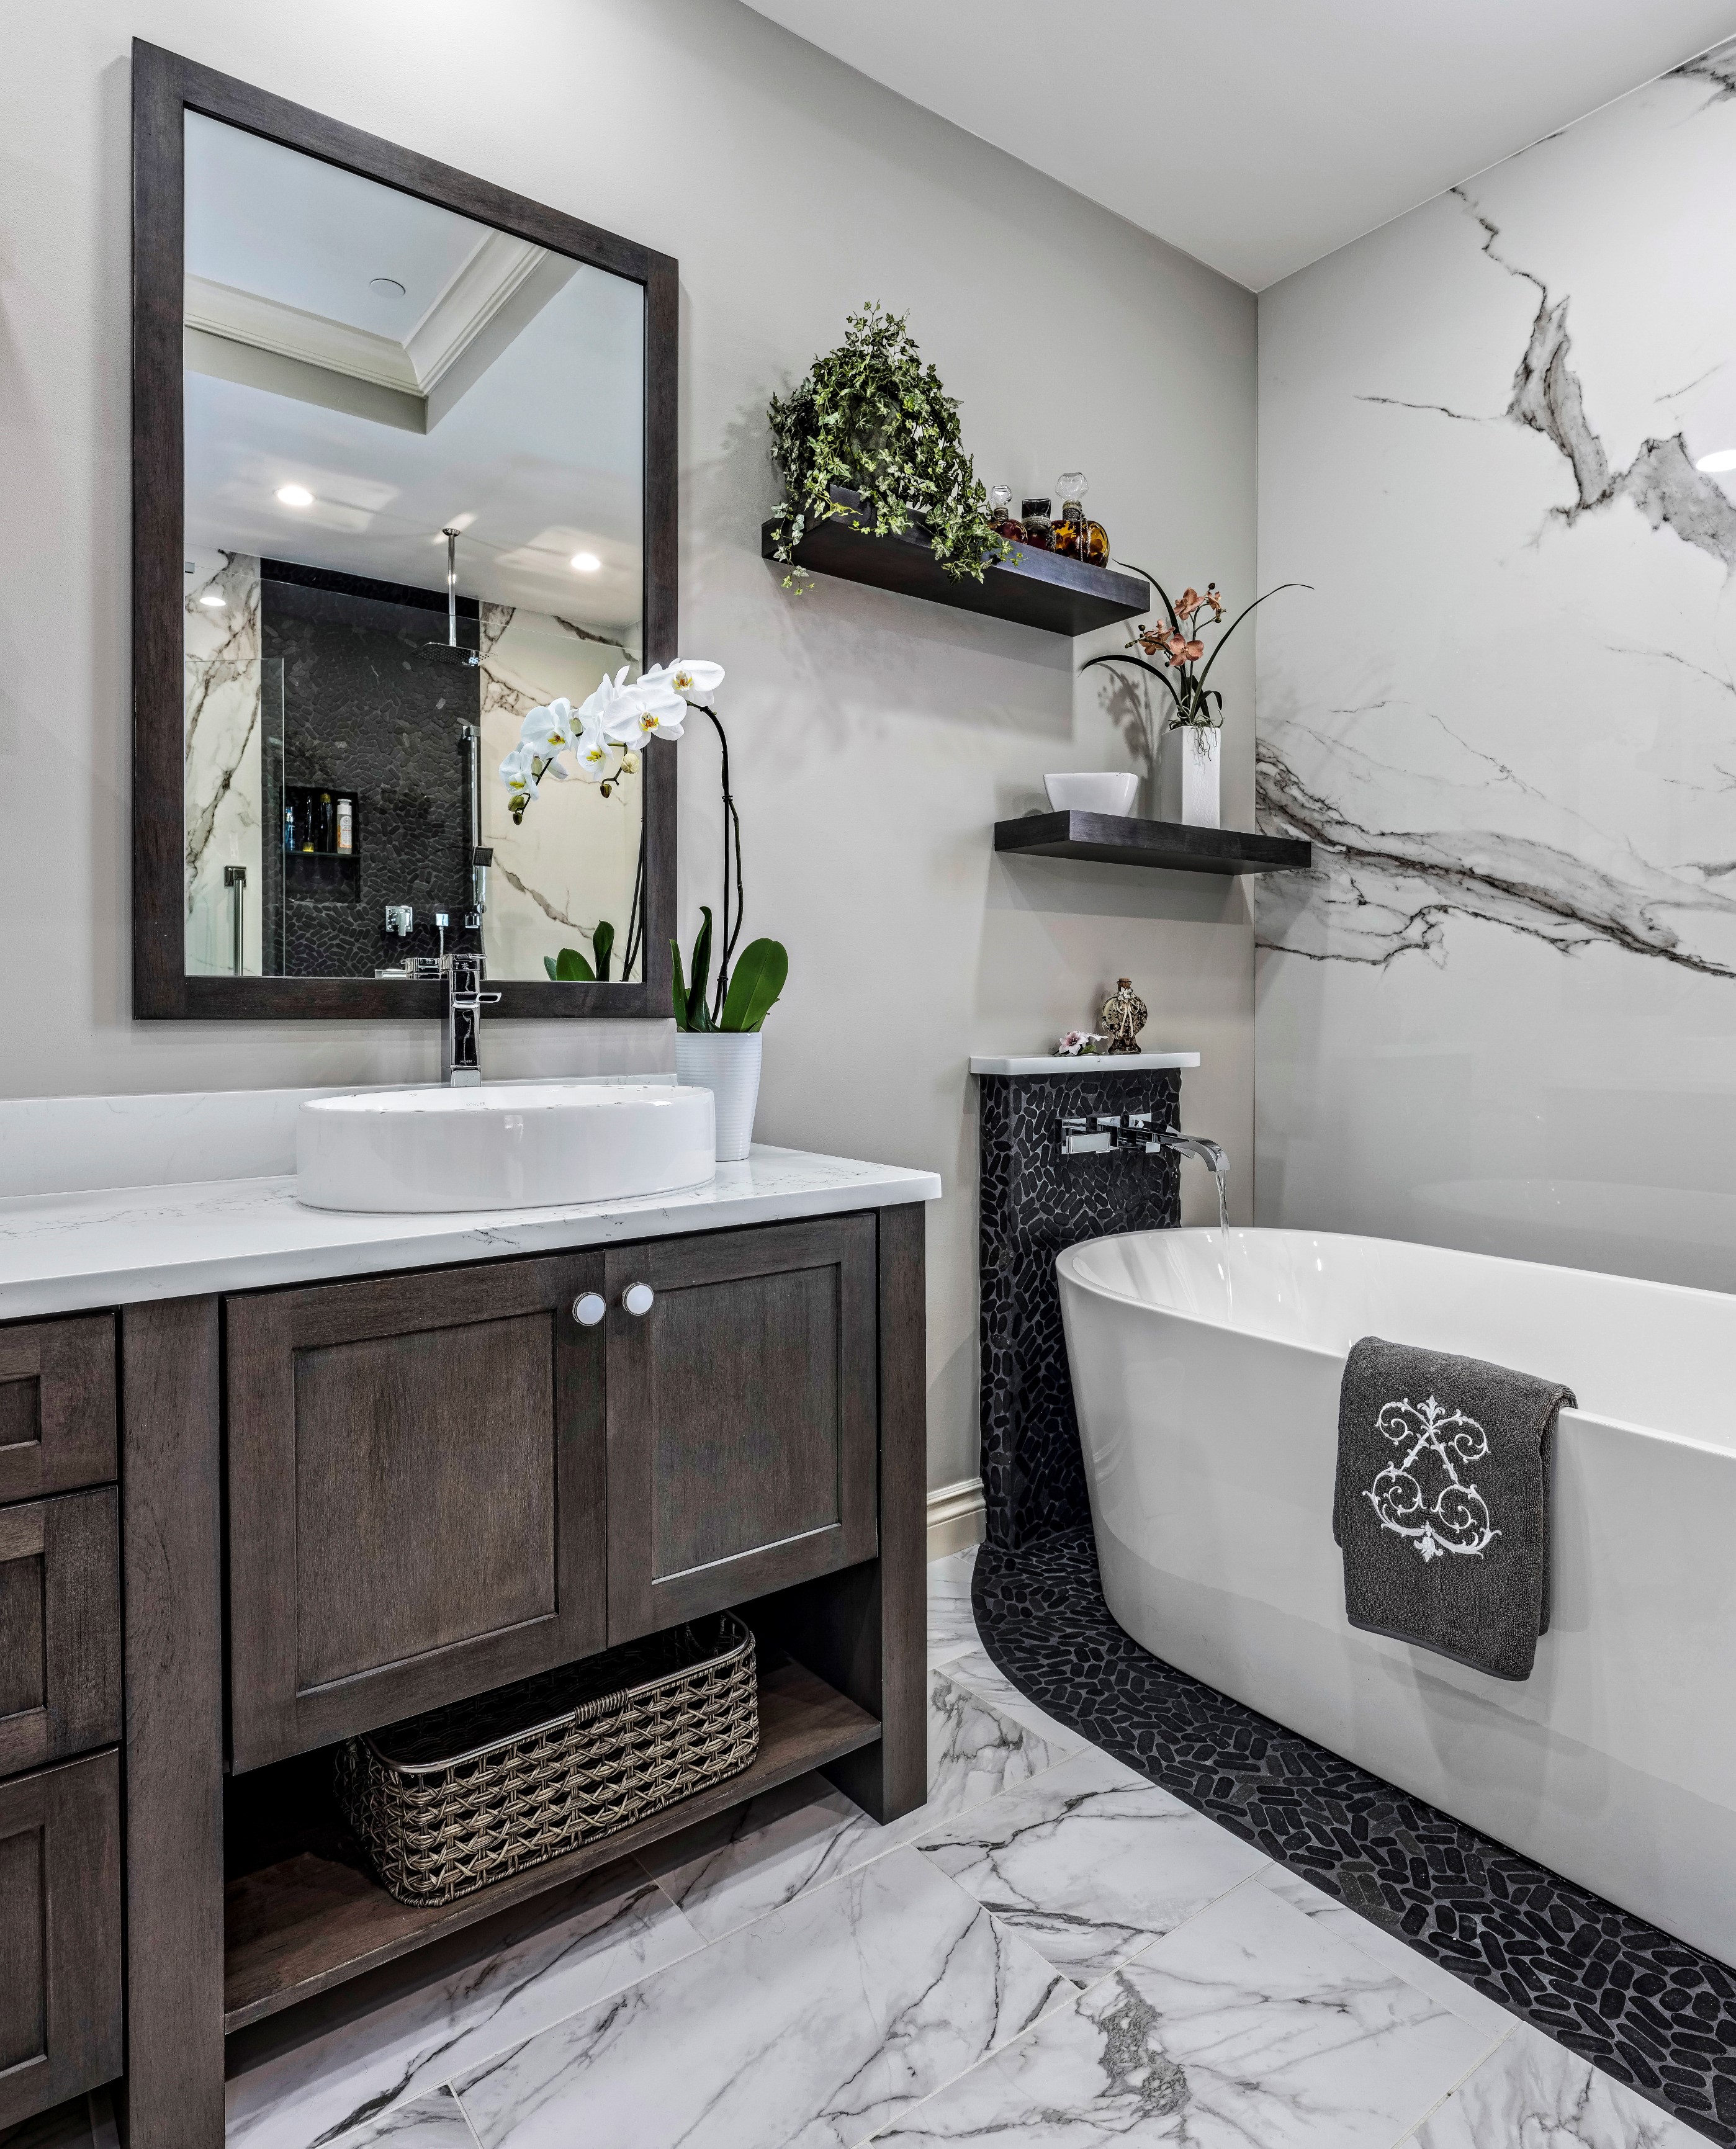 Bathroom Remodeling Typically Cost, How Much Does It Cost To Remodel Two Bathrooms